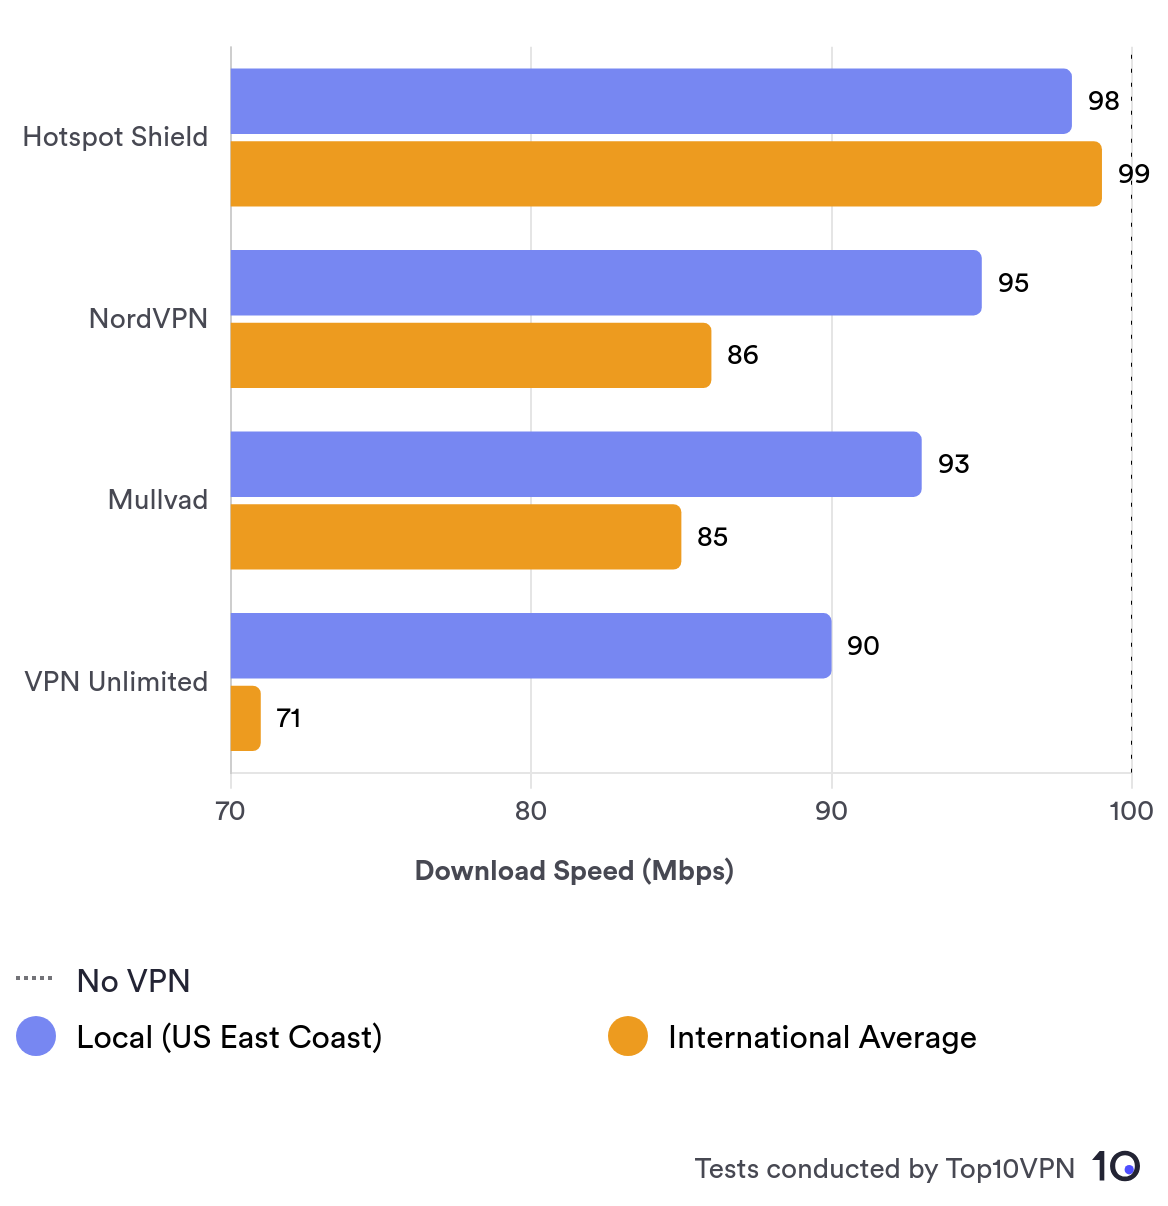 Bar chart comparing local and international speeds, descending in this order: Hotspot Shield, NordVPN, Mullvad VPN, and KeepSolid VPN Unlimited. 